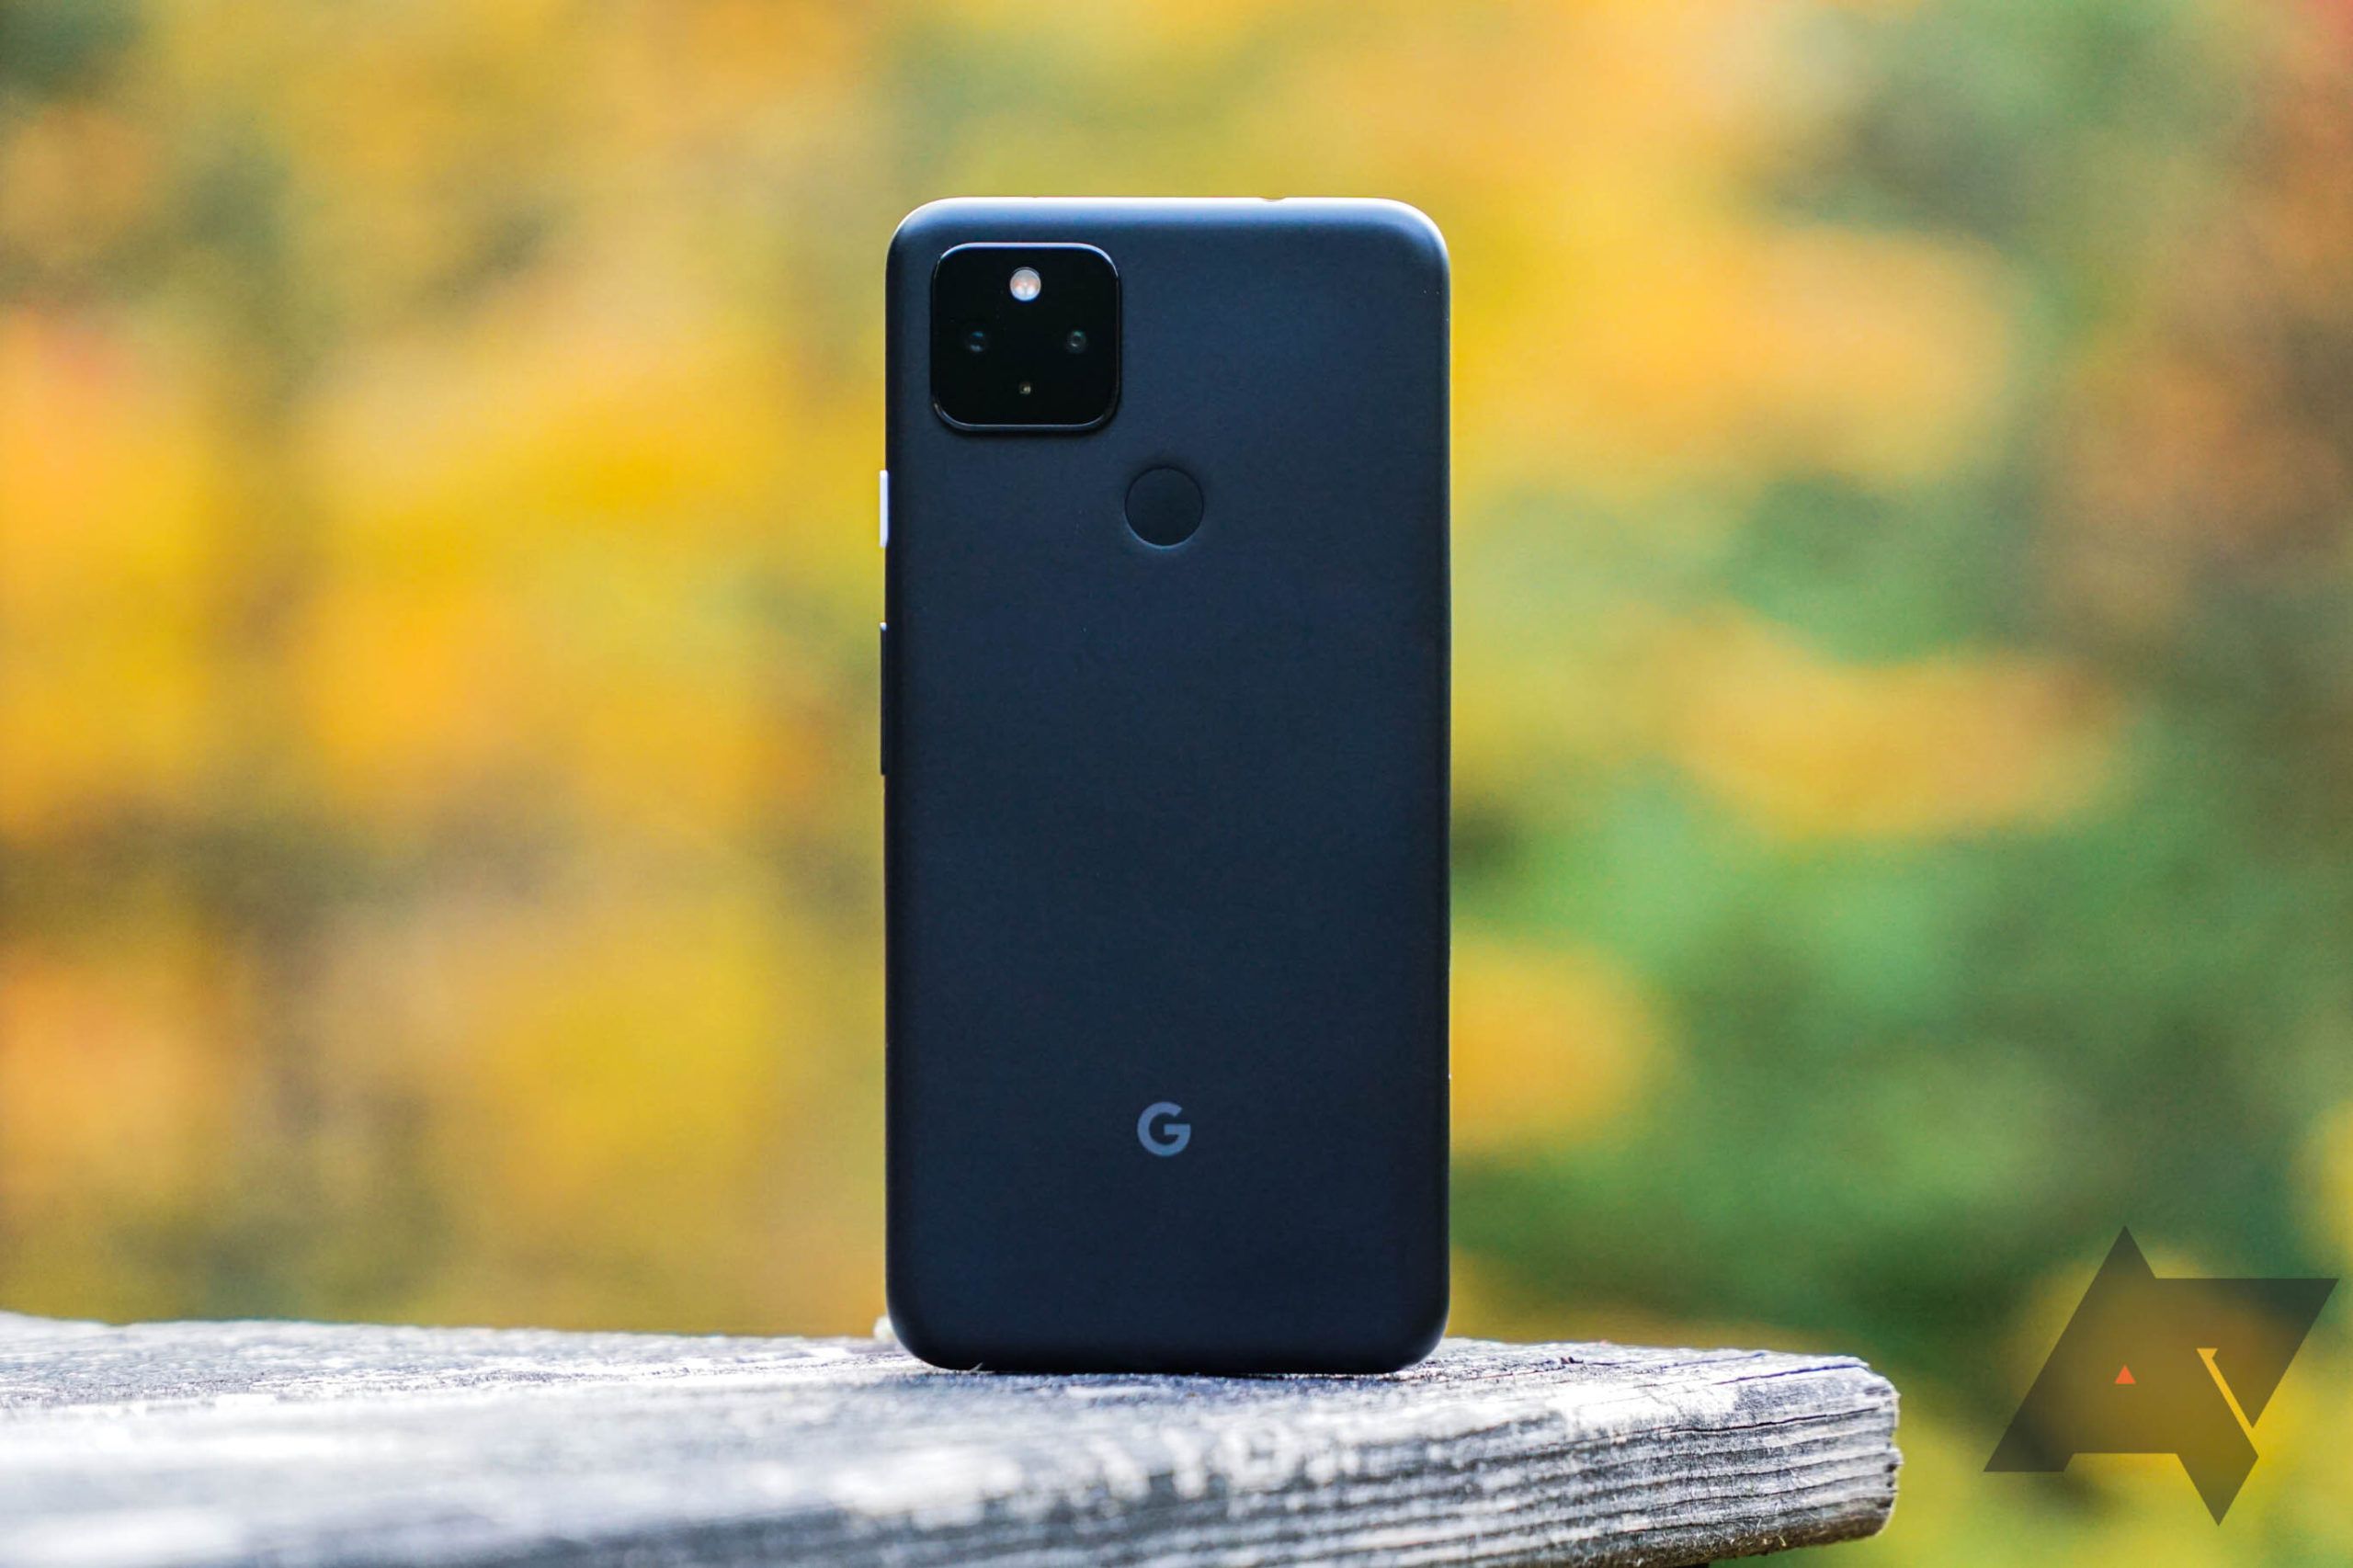 The best Google Pixel phones of all time, according to Android Police